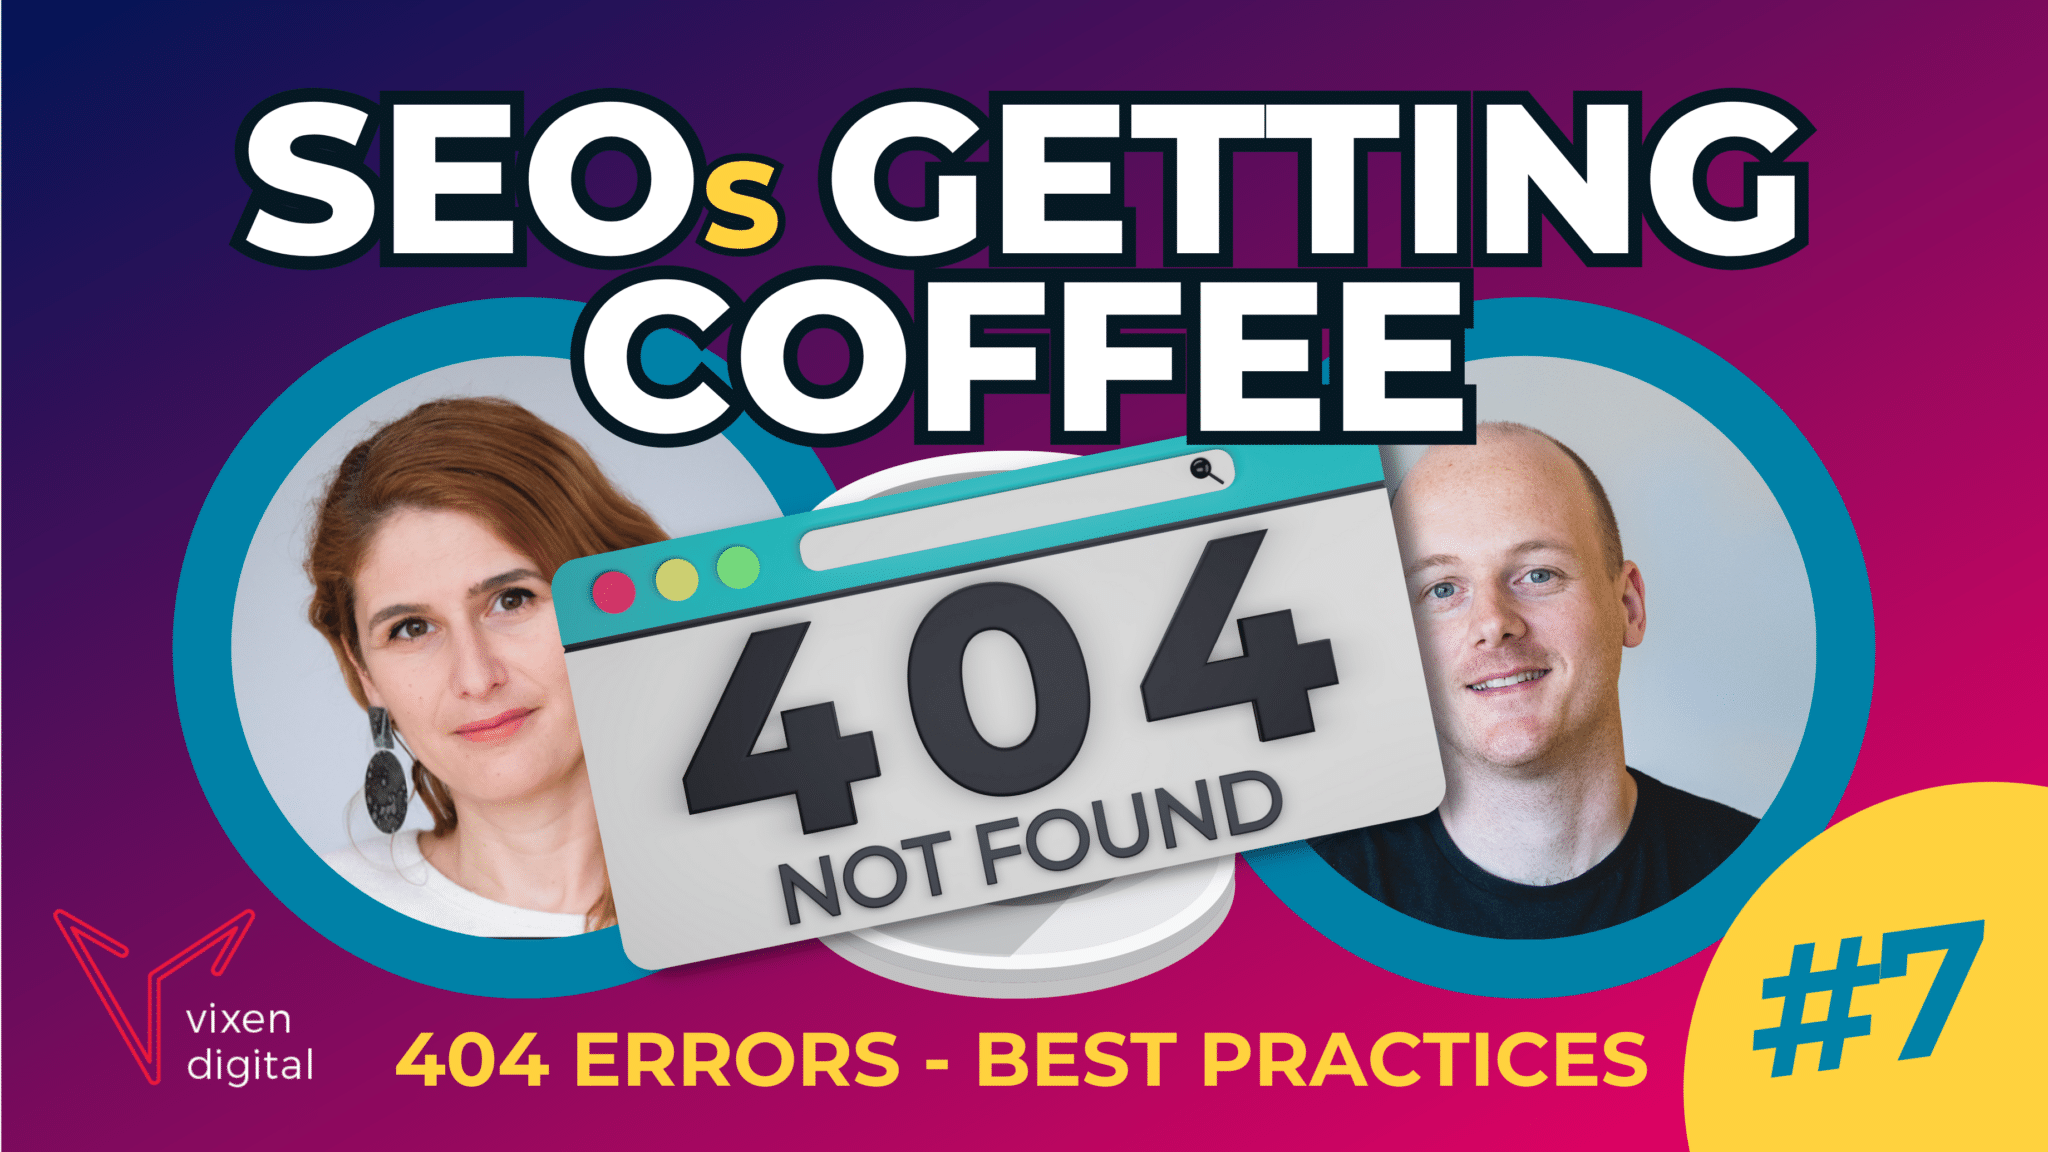 SEOs getting coffee episode 7 - 404 Page Not Found Error - SEO Best Practices